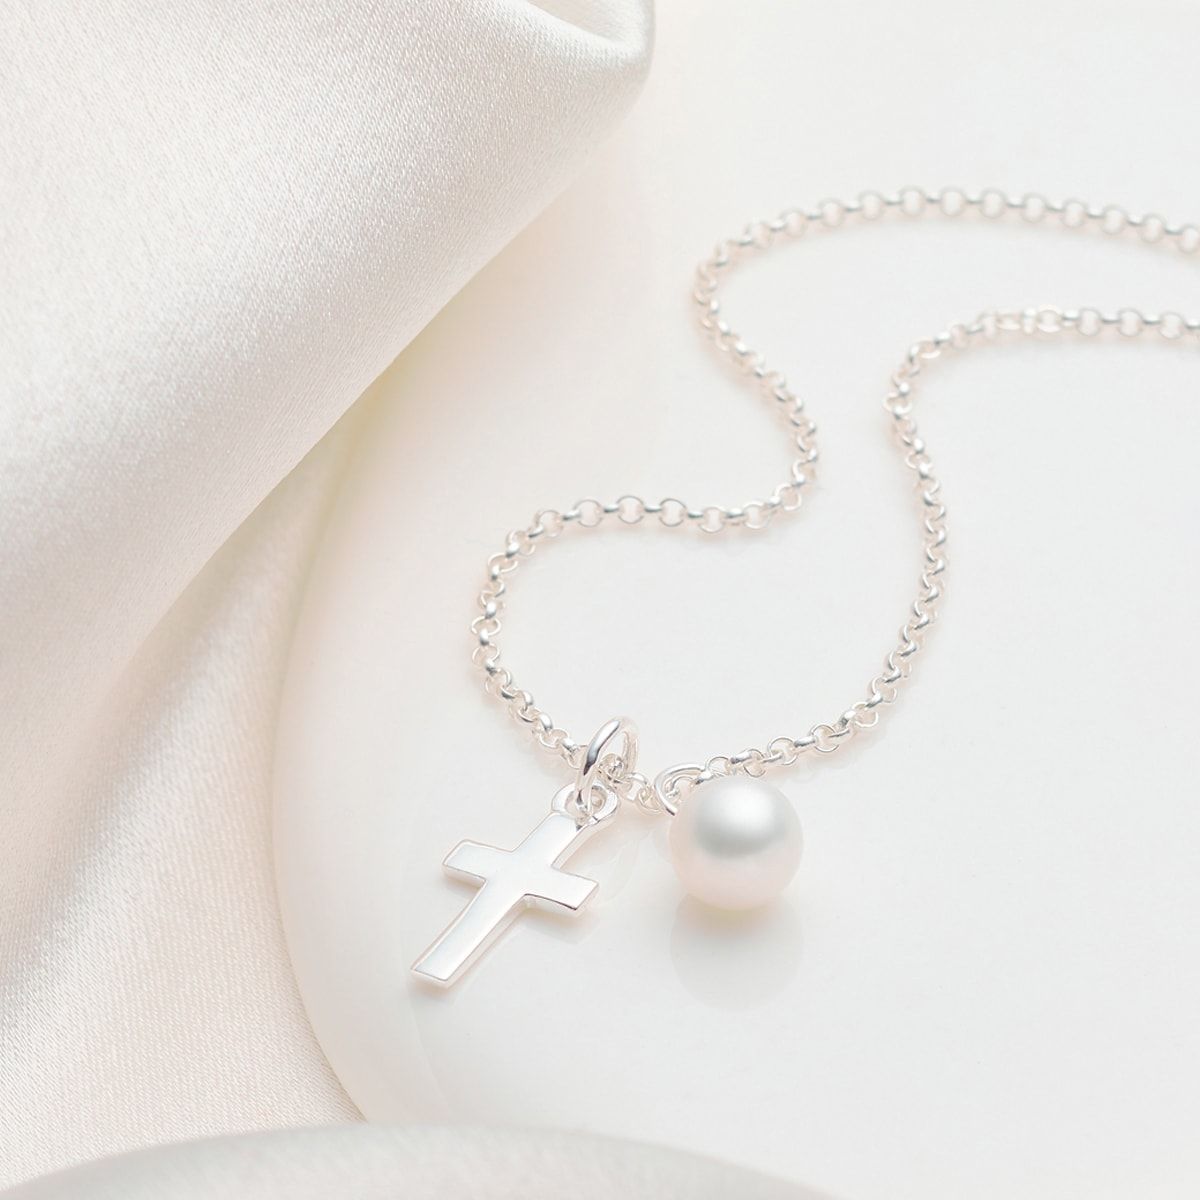 My First Communion Cross Necklace